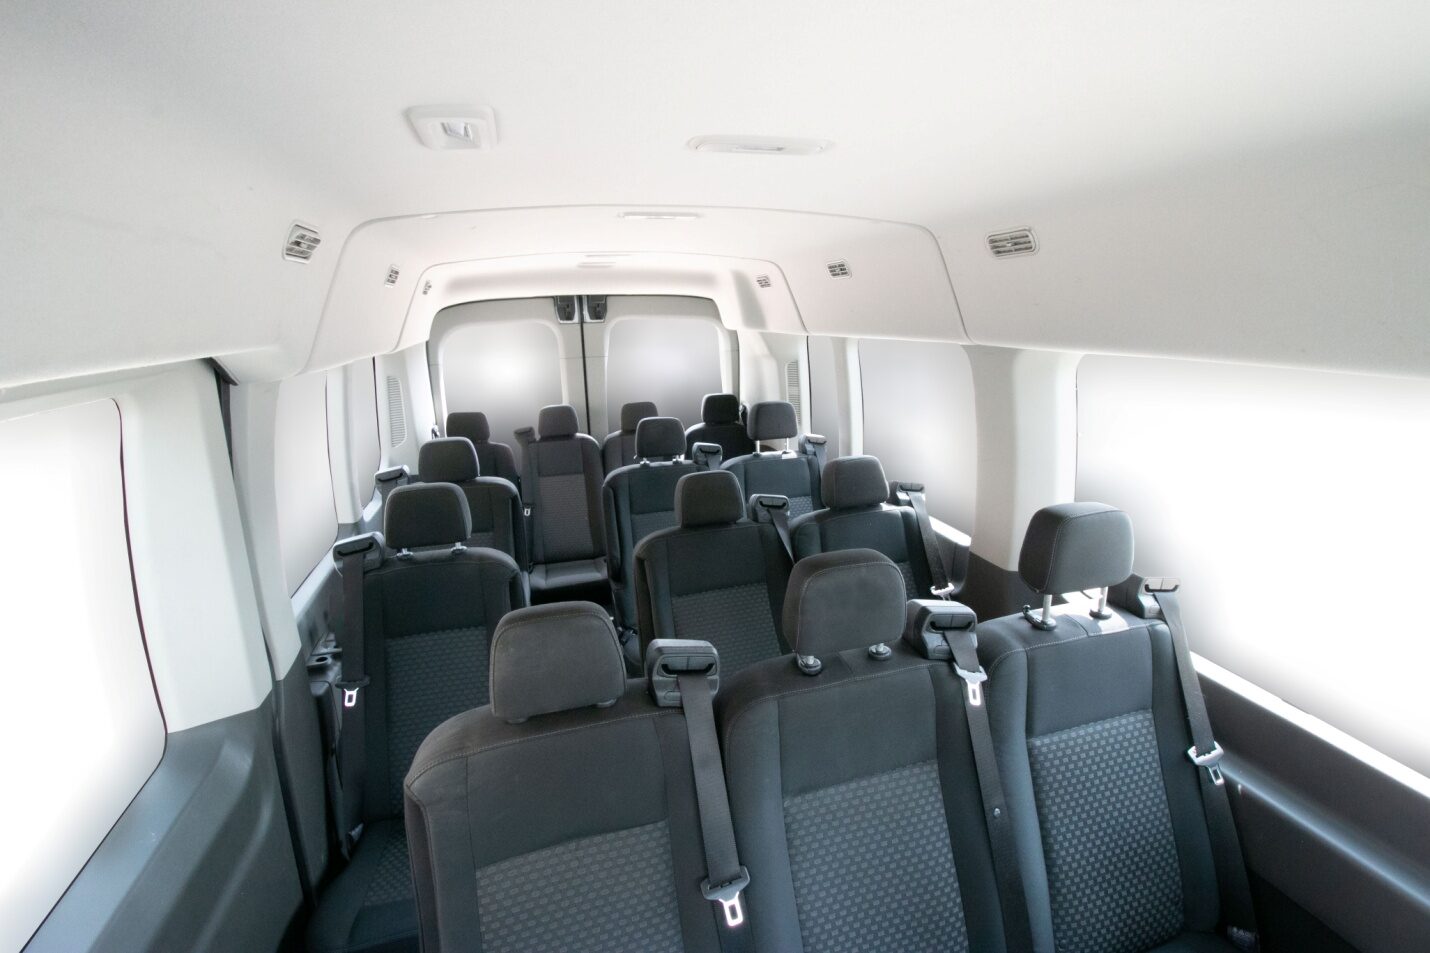 Interior of the van with accessible features